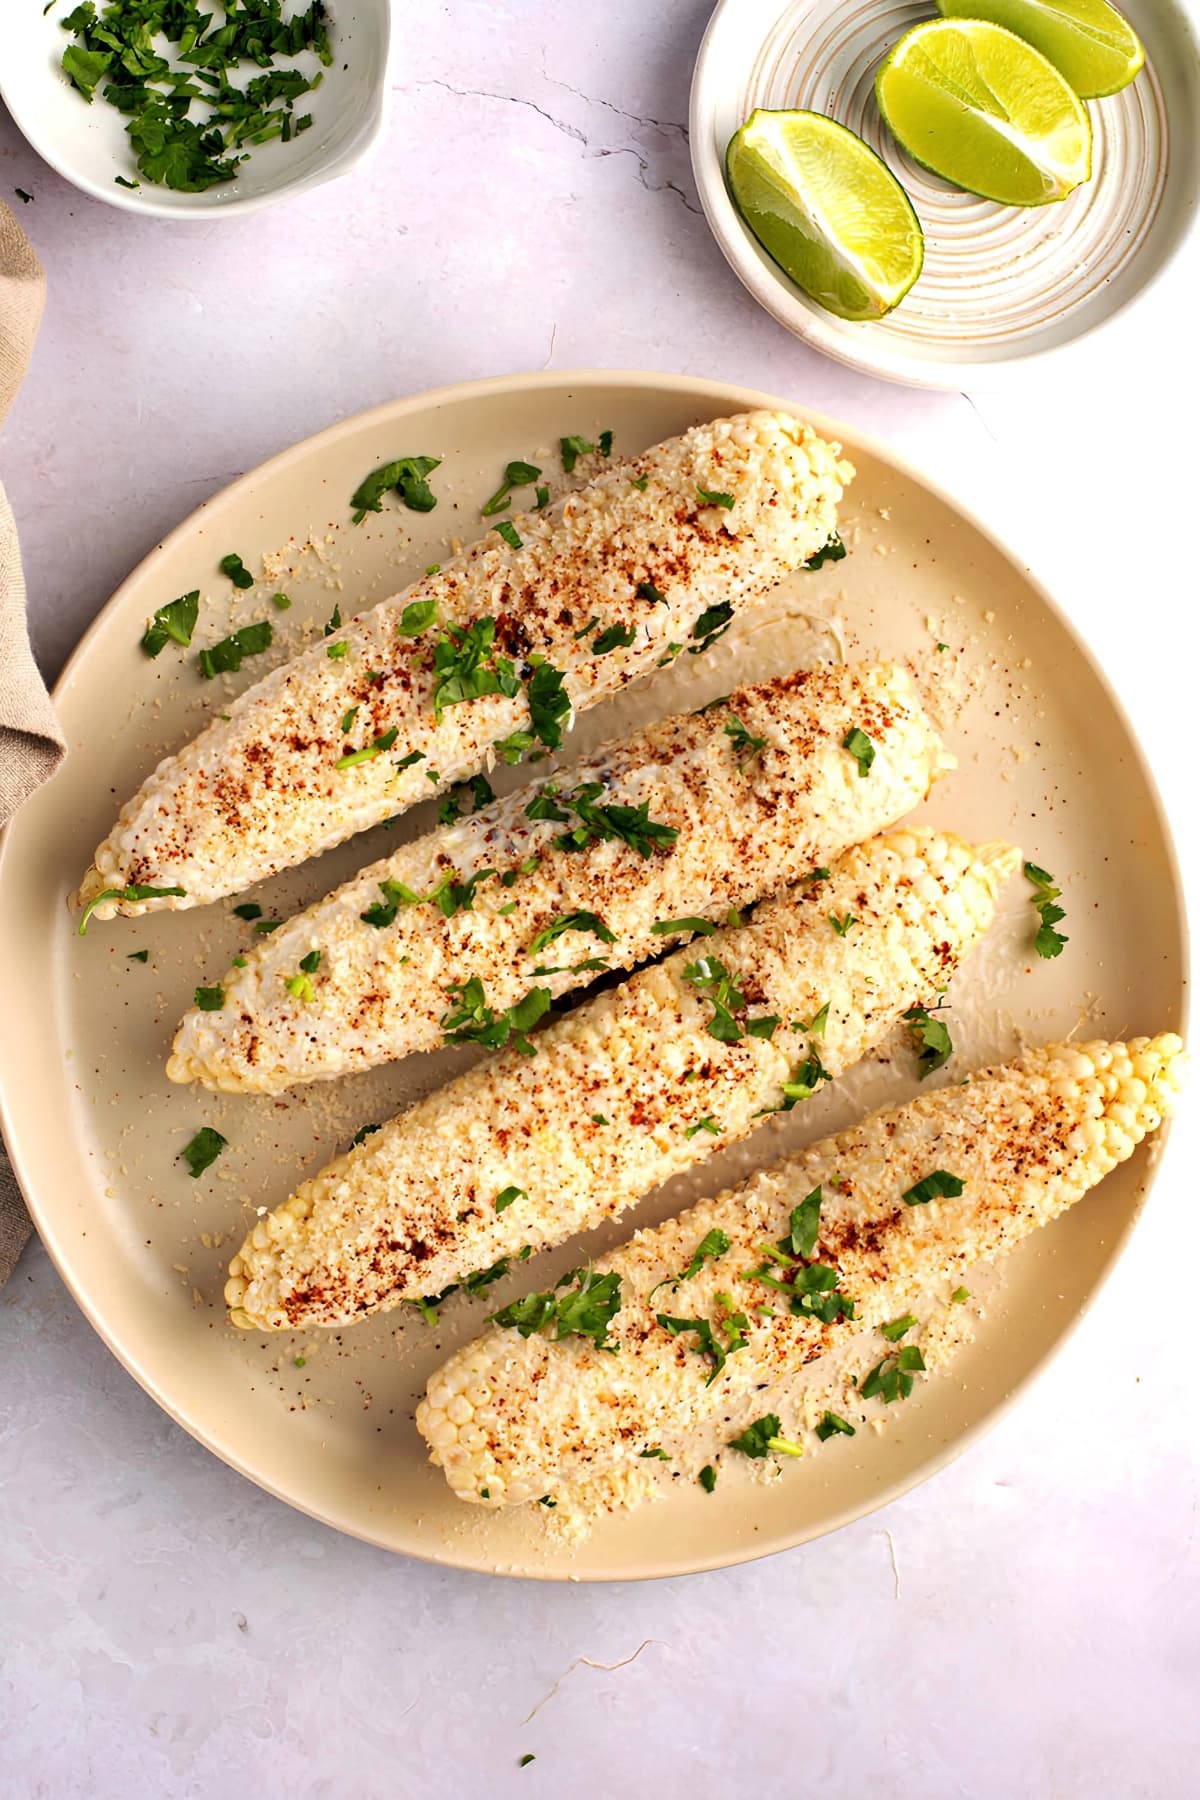 Grilled Mexican Street Corn 
with Lime Slice on the Side